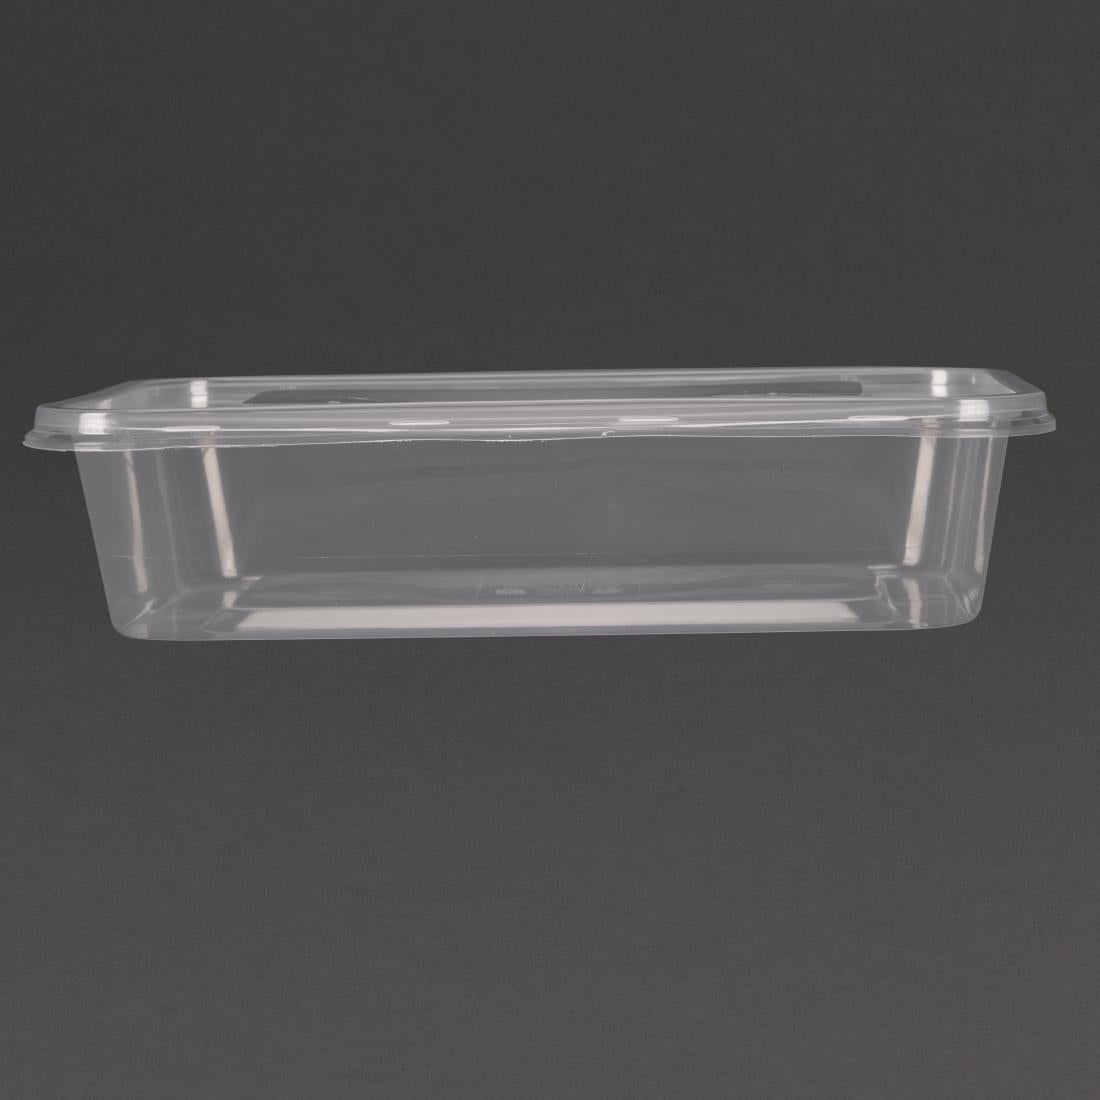 Fiesta Plastic Microwavable Containers With Lid (Pack of 250) JD Catering Equipment Solutions Ltd